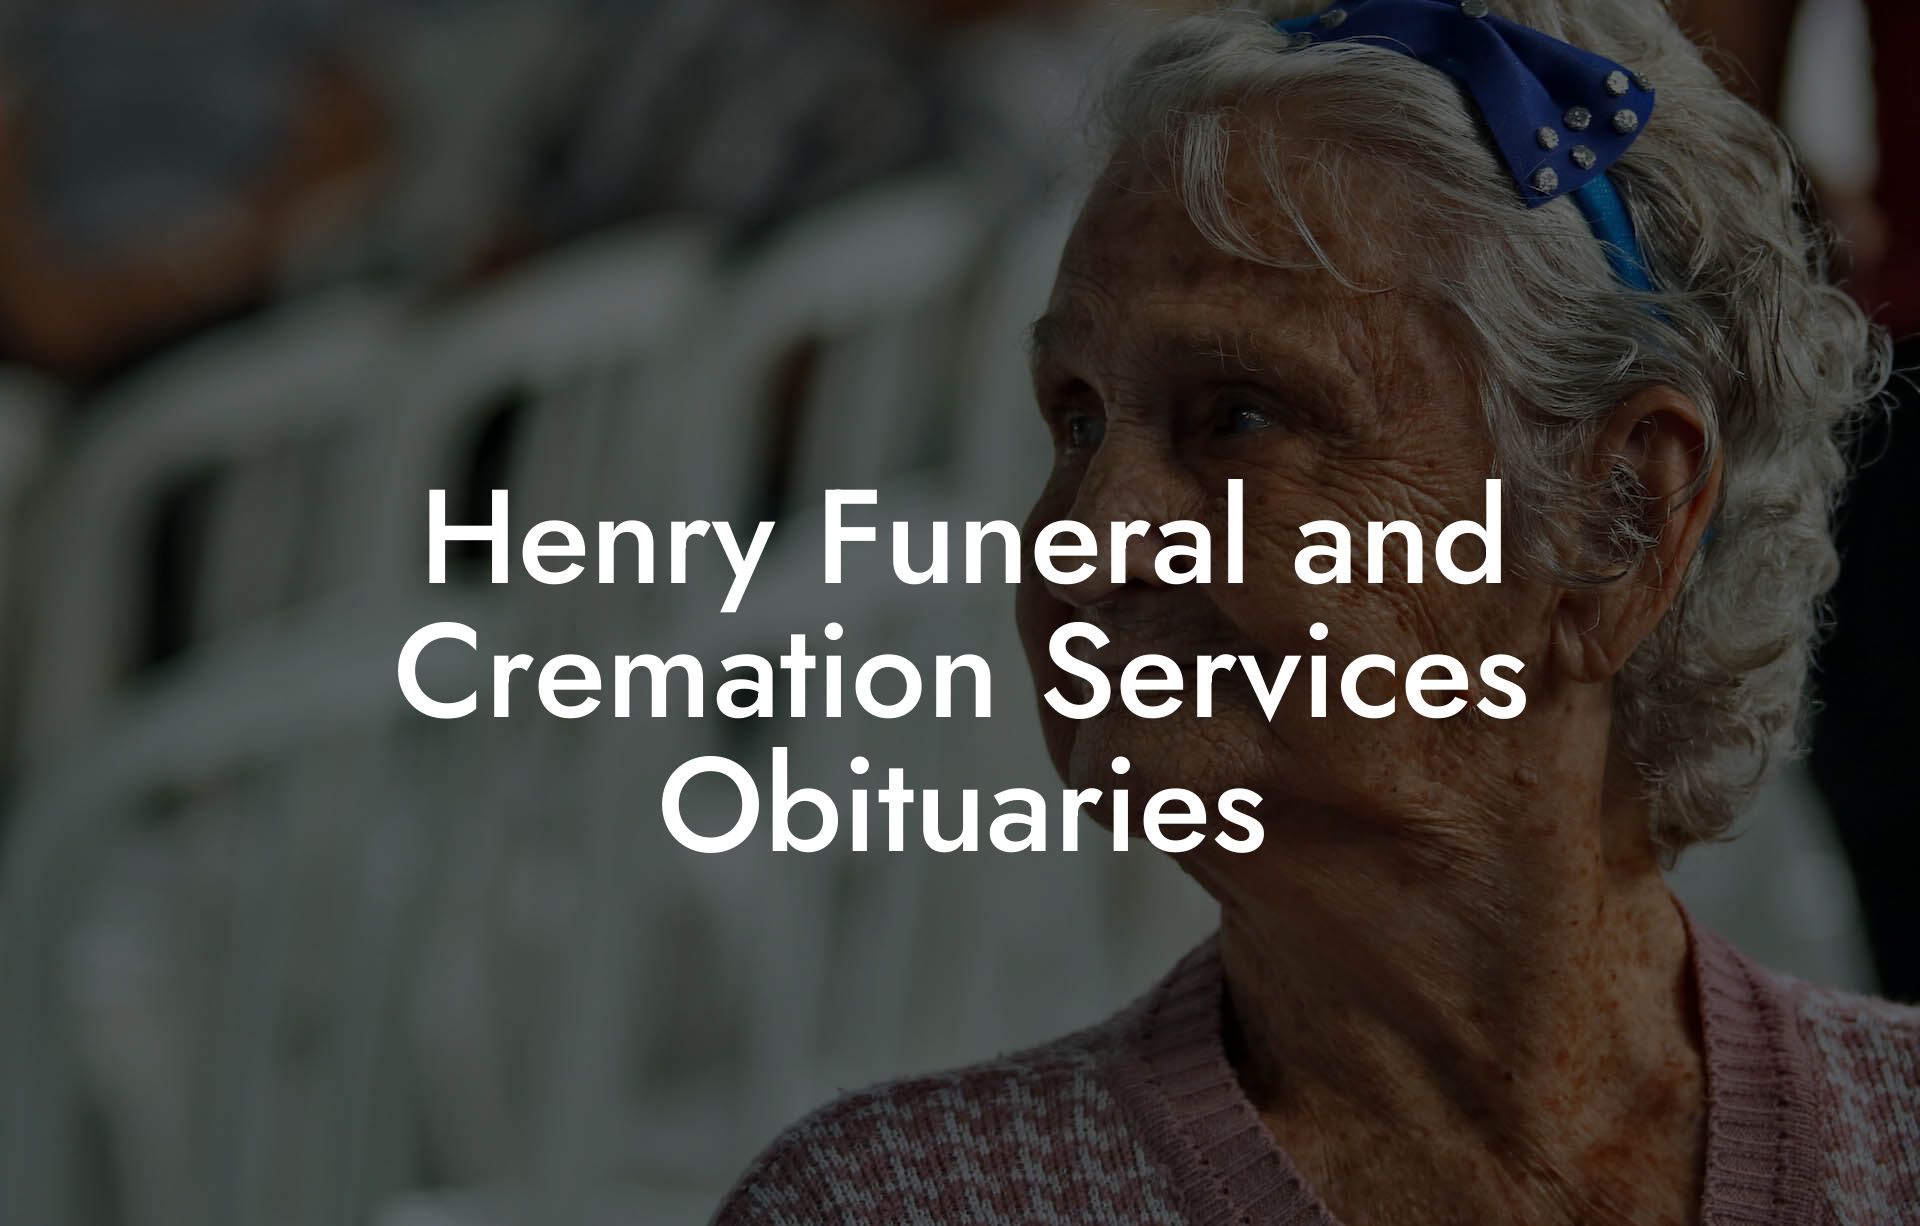 Henry Funeral and Cremation Services Obituaries